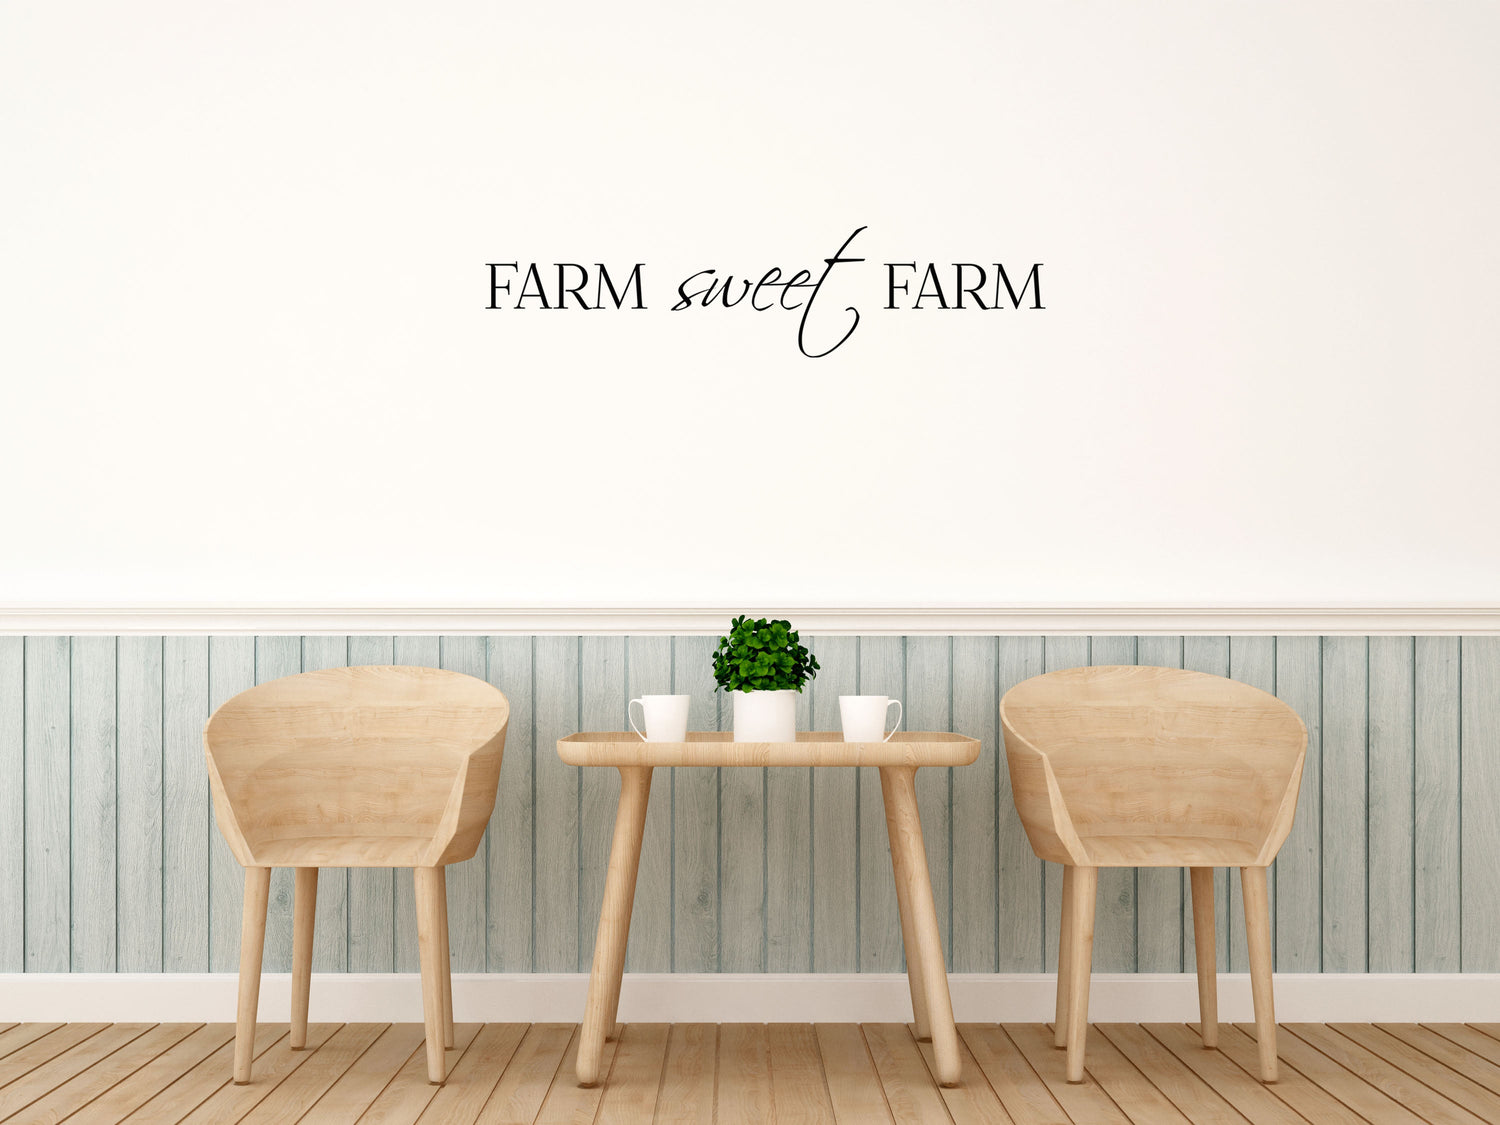 Farm Sweet Farm Wall Quote Decal - Vinyl Wall Decal Farming Decal - Country Farm Wall Decal Art - Farming Wall Quote Sticker - Kitchen Vinyl Wall Decal Title Done 